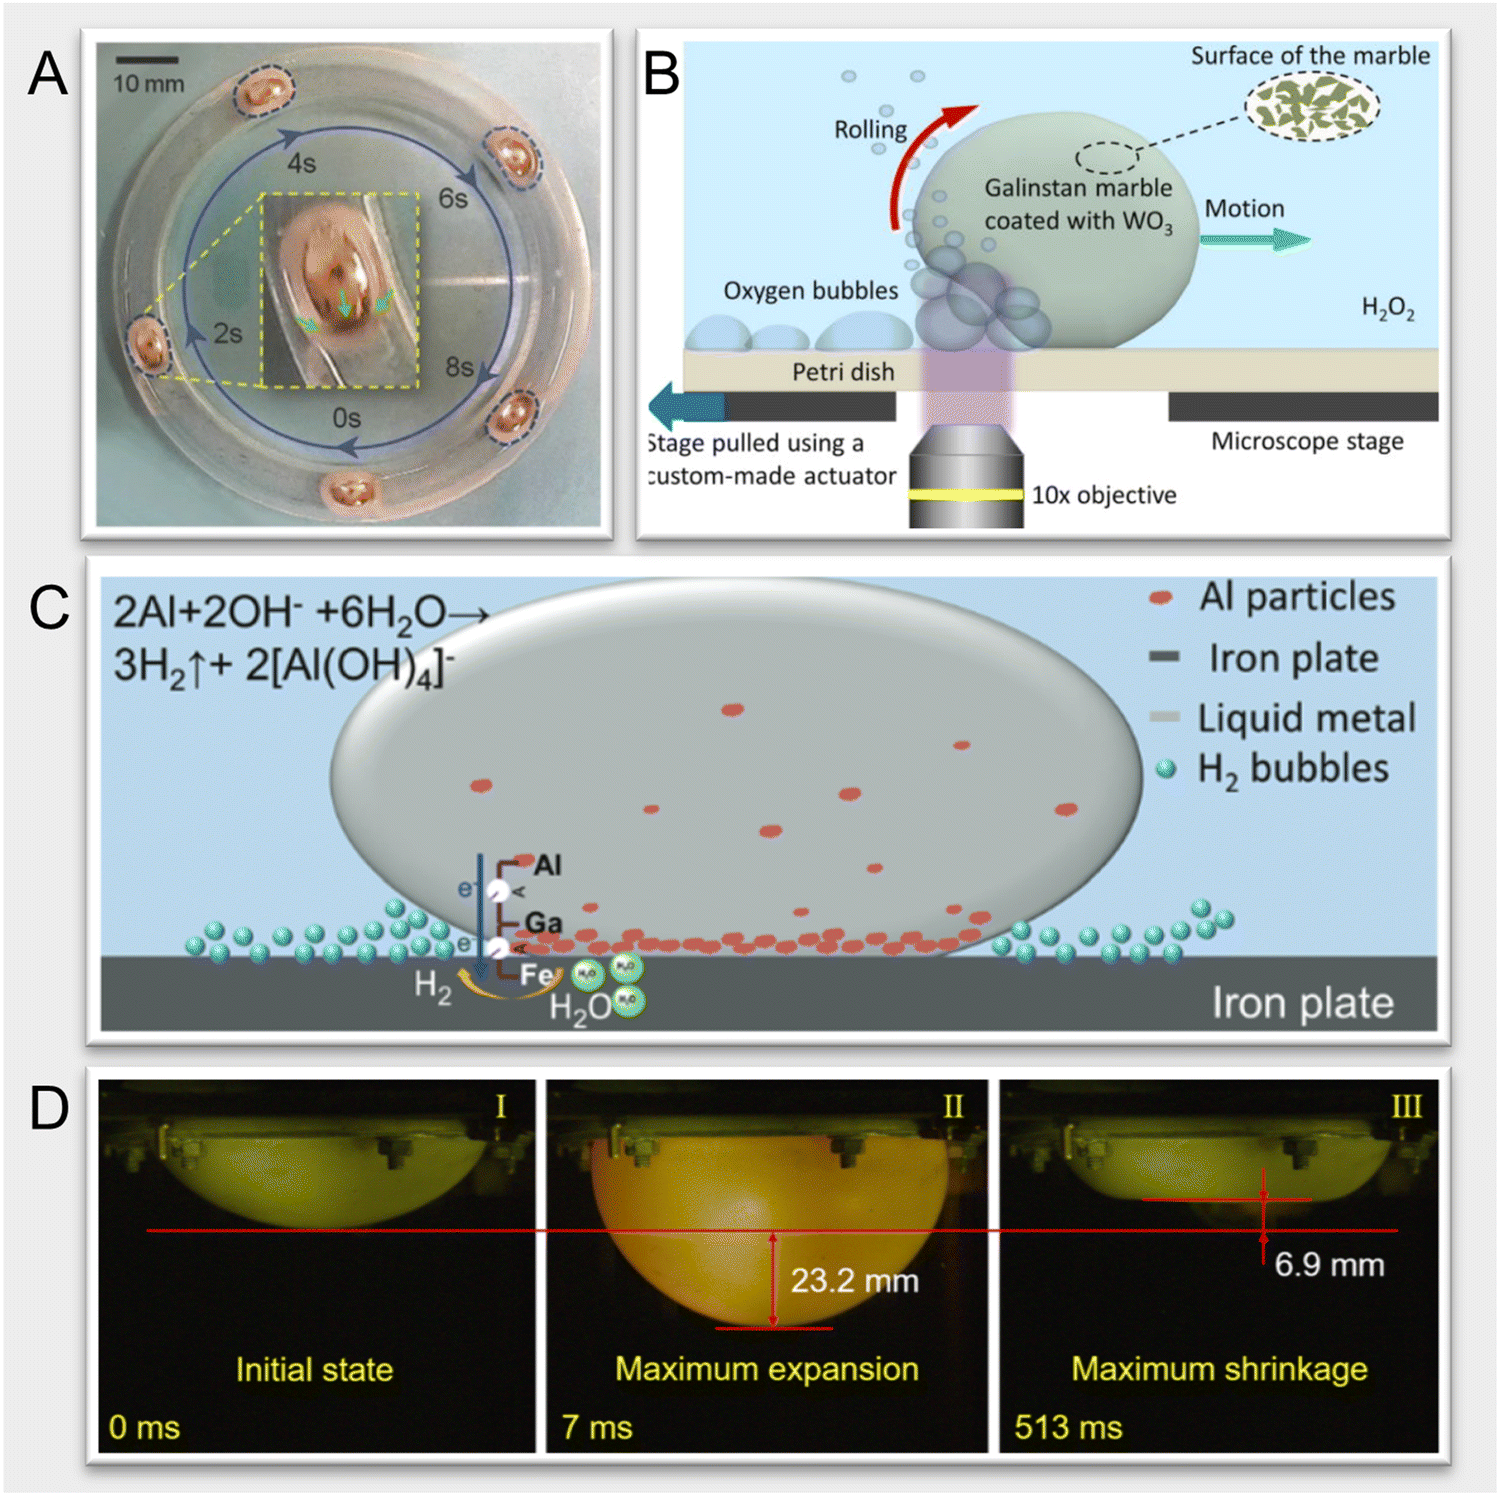 Soft shape-programmable surfaces by fast electromagnetic actuation of  liquid metal networks